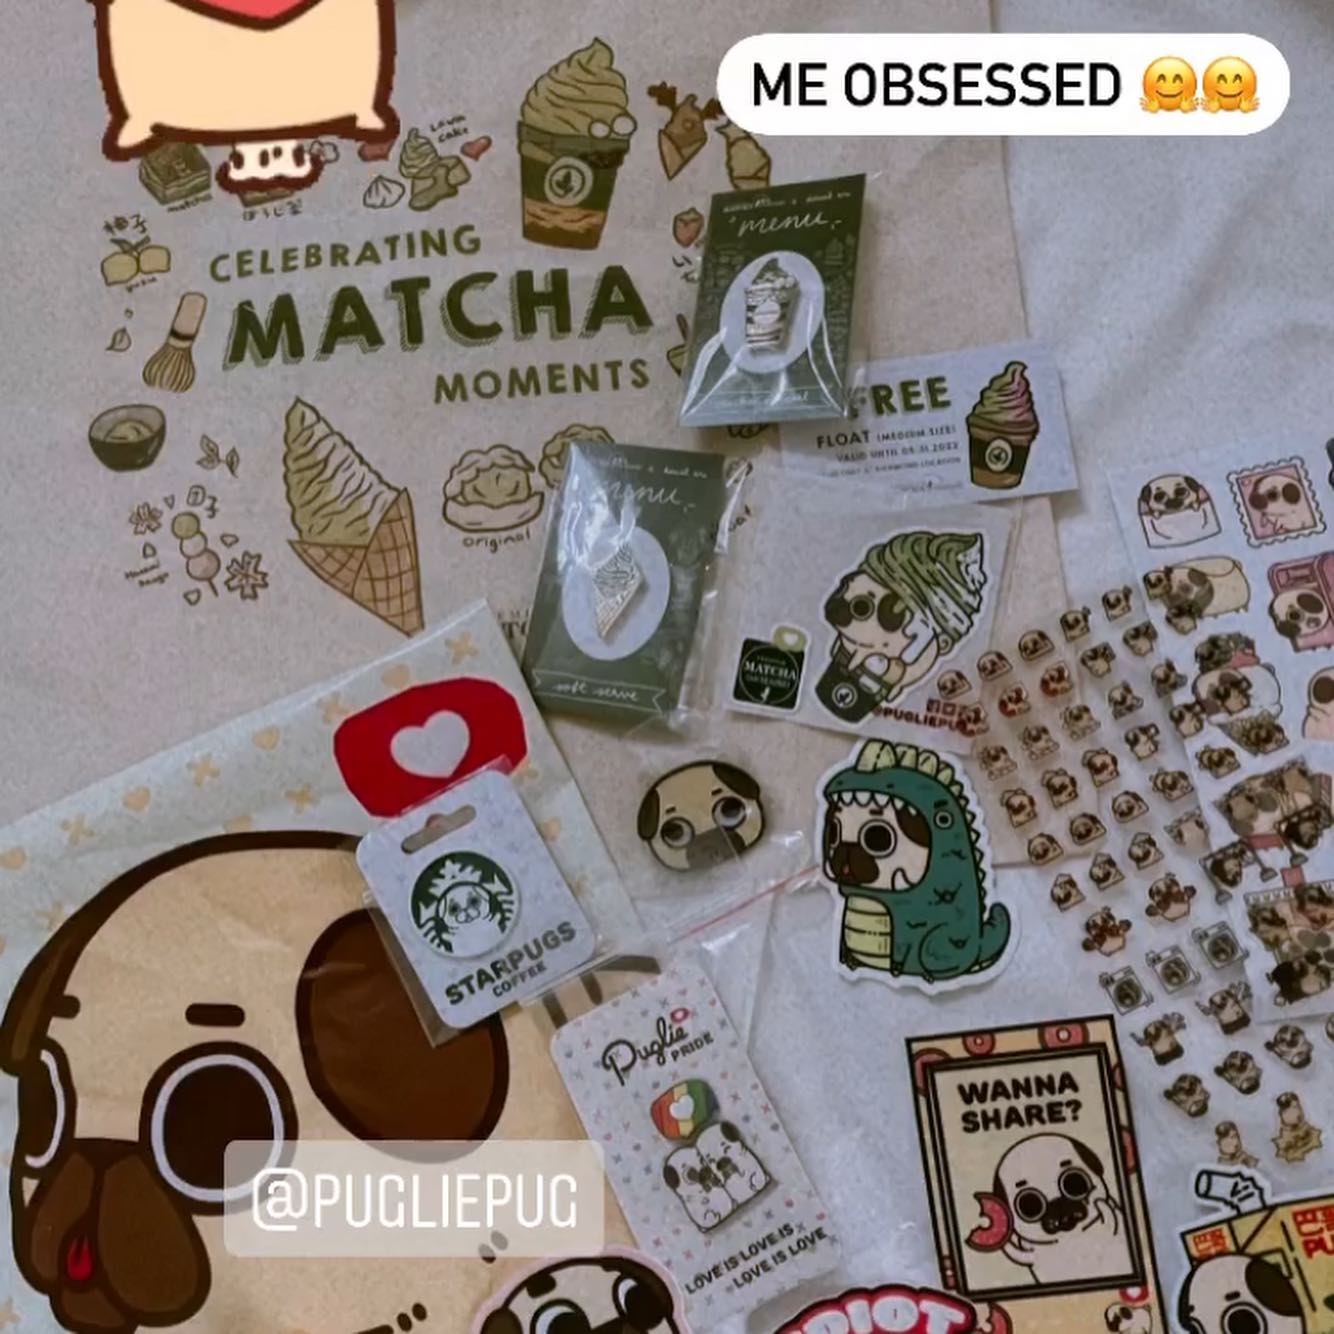 Photo of some Puglie stickers and pins, along with the Matcha Cafe Maiko special tote bag and pins. Caption says “Me obsessed.”